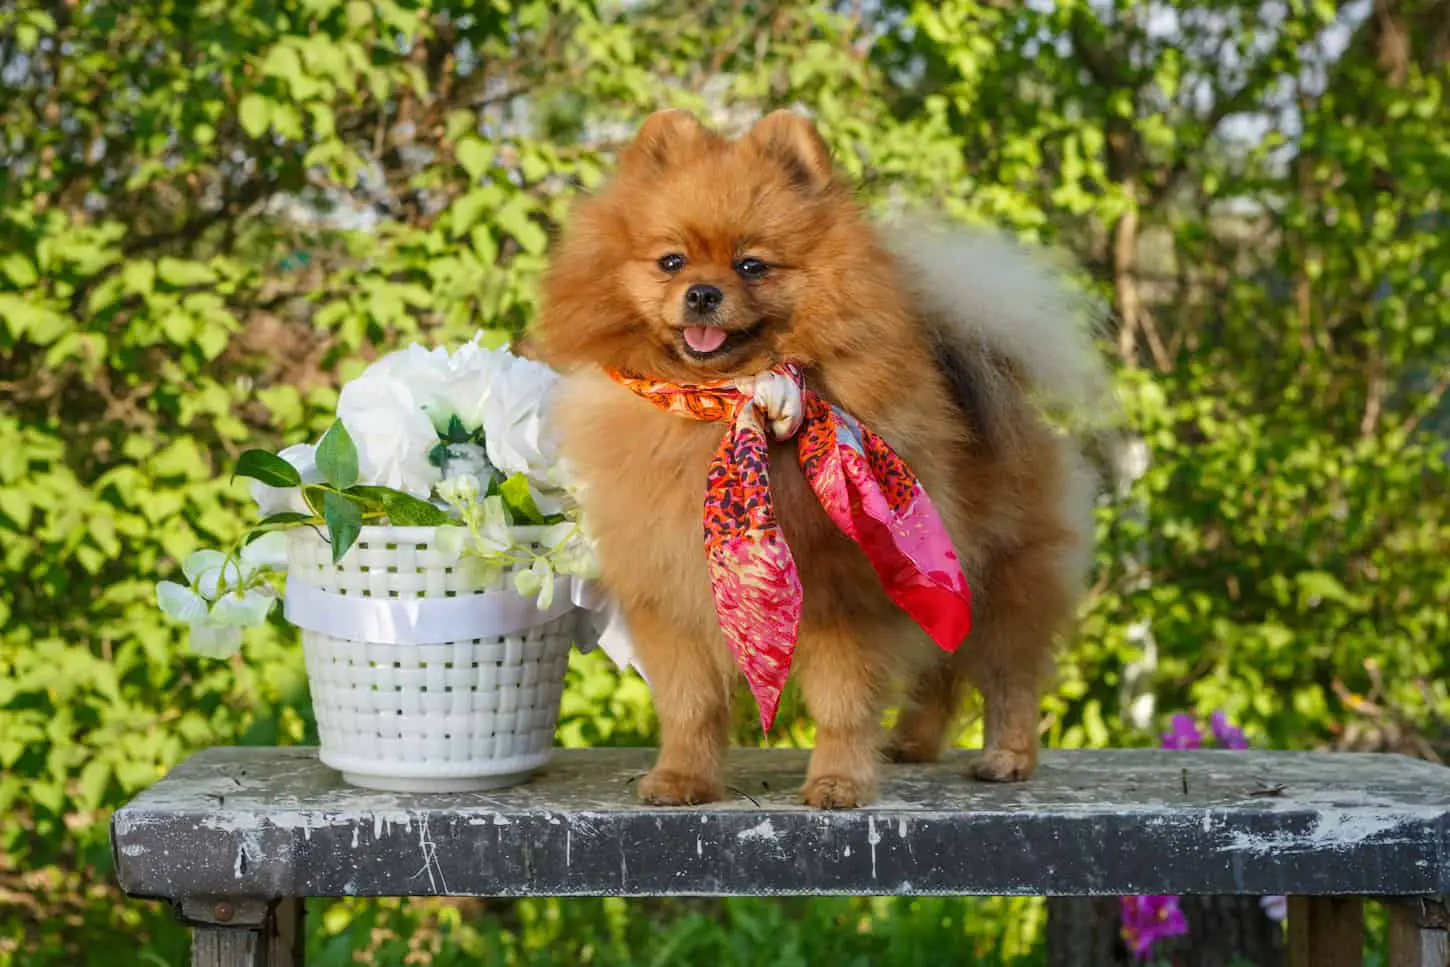 An image of a Dog breed Pomeranian stands on a table in the garden in the spring.